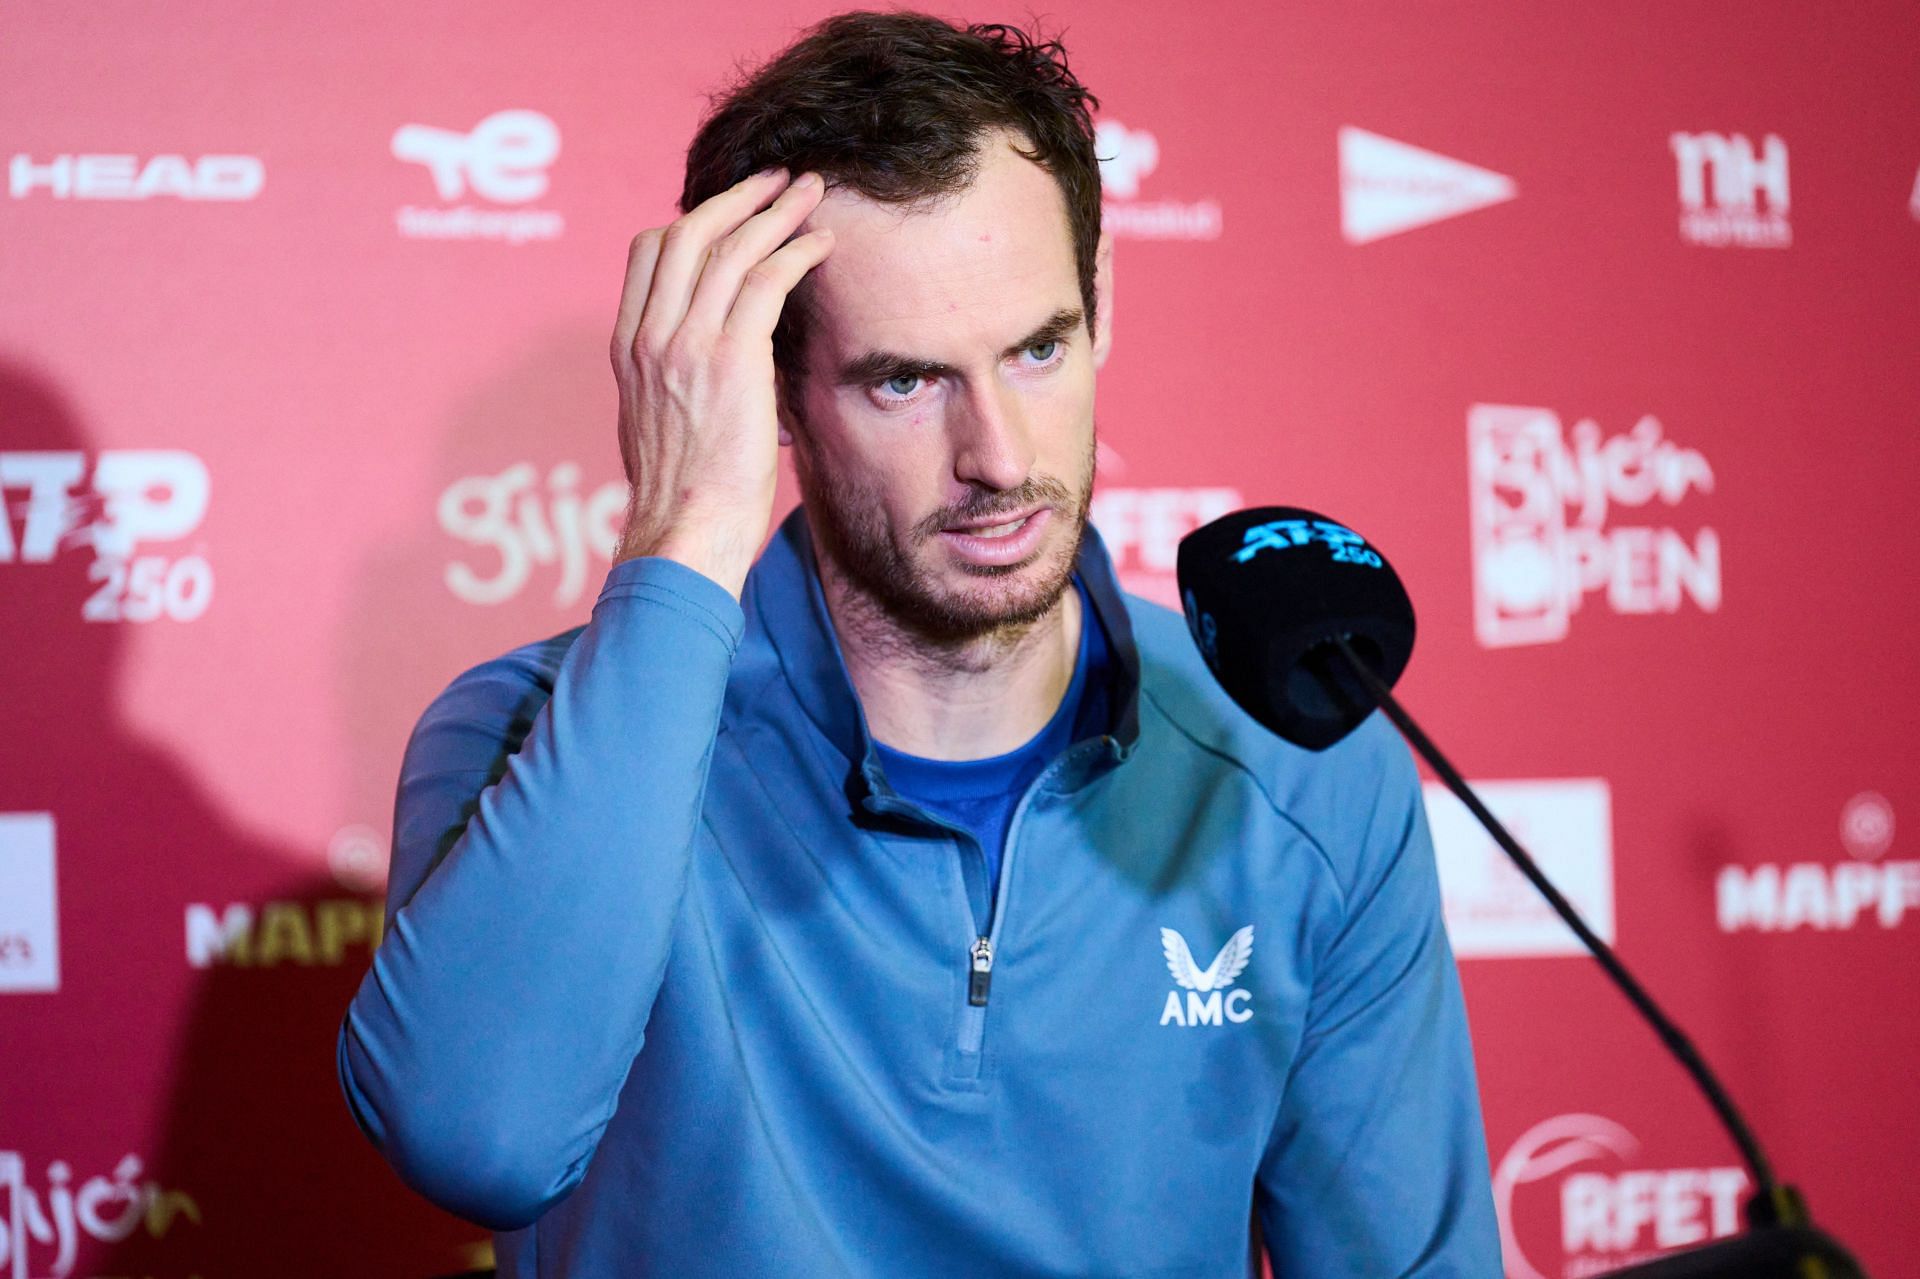 Andy Murray at the Gijon Open